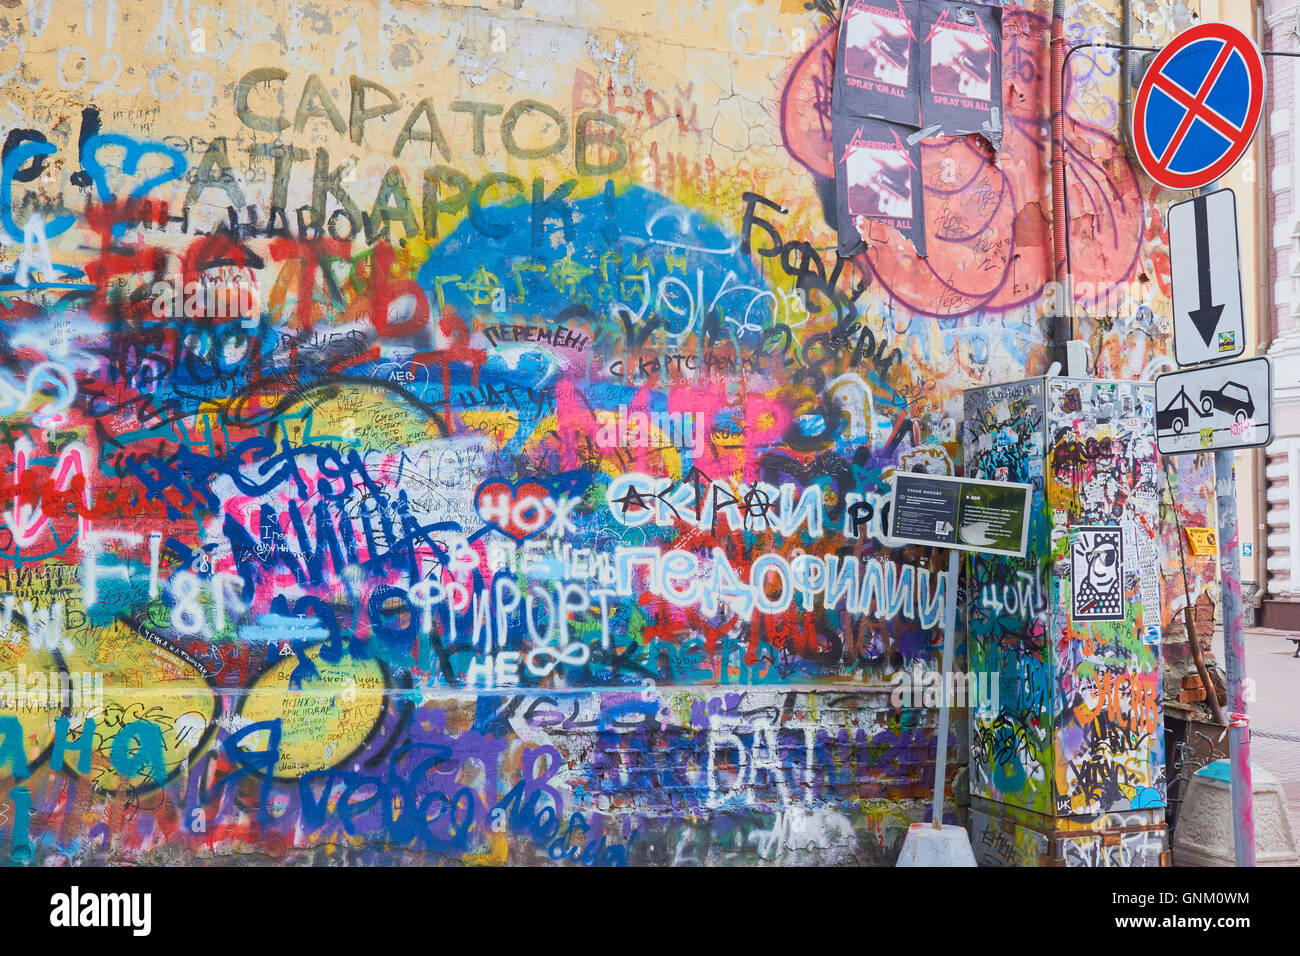 Graffiti covered wall dedicated to Soviet singer and musician Viktor Tsoi and his band Kino, Moscow, Russia. He died aged 28 in a 1990 car accident. Stock Photo